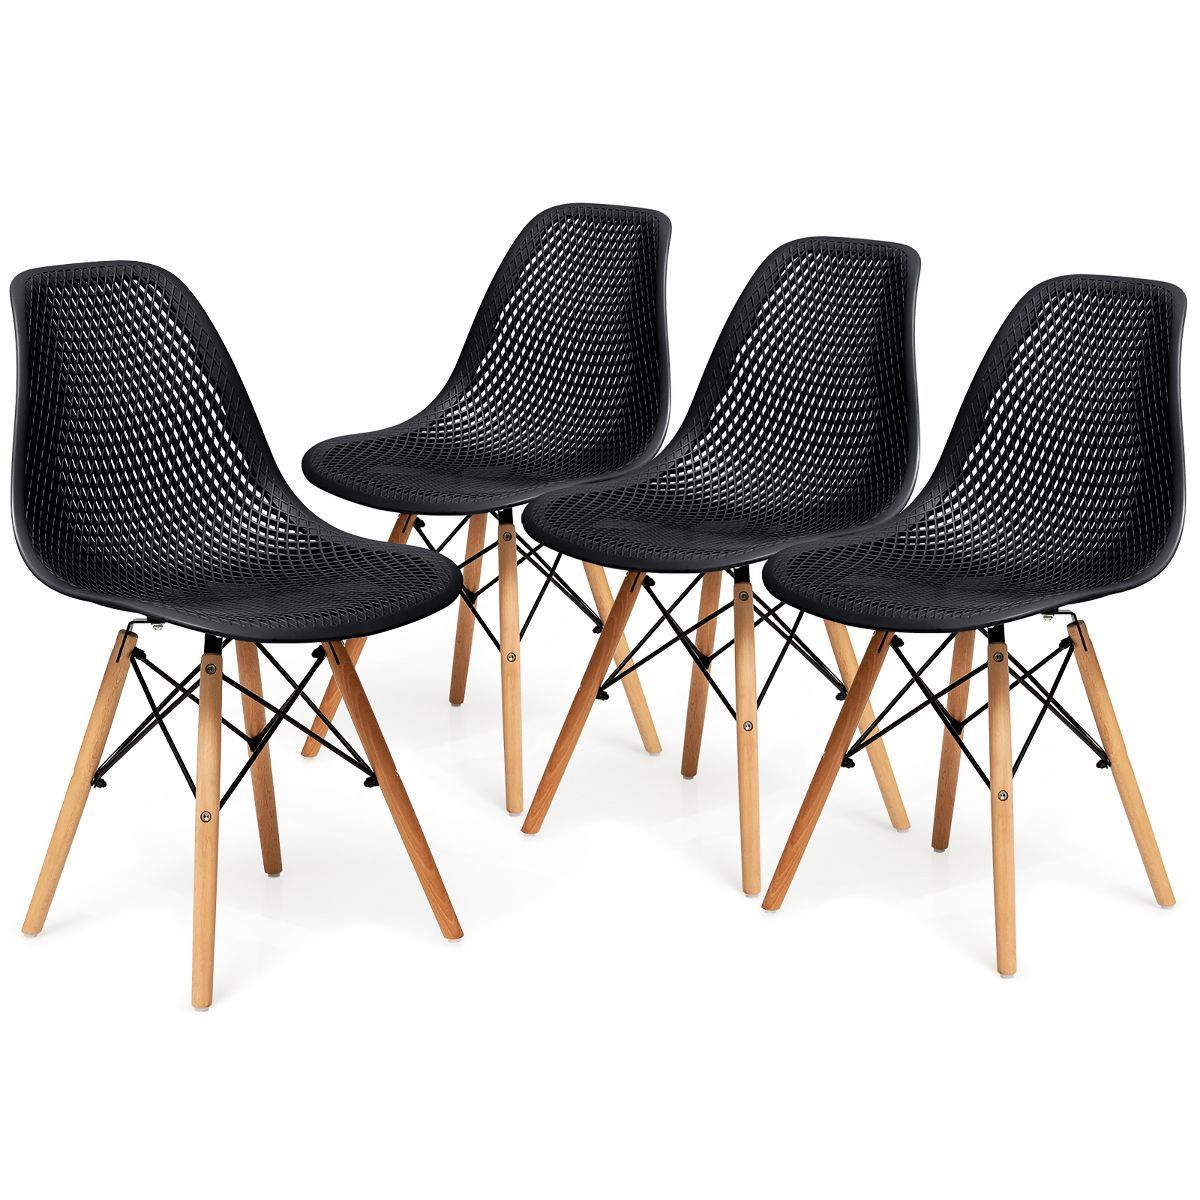 Costway Set of 4 Plastic Hollow Out Chair Mid Century Modern Wood-Leg Seat | Target